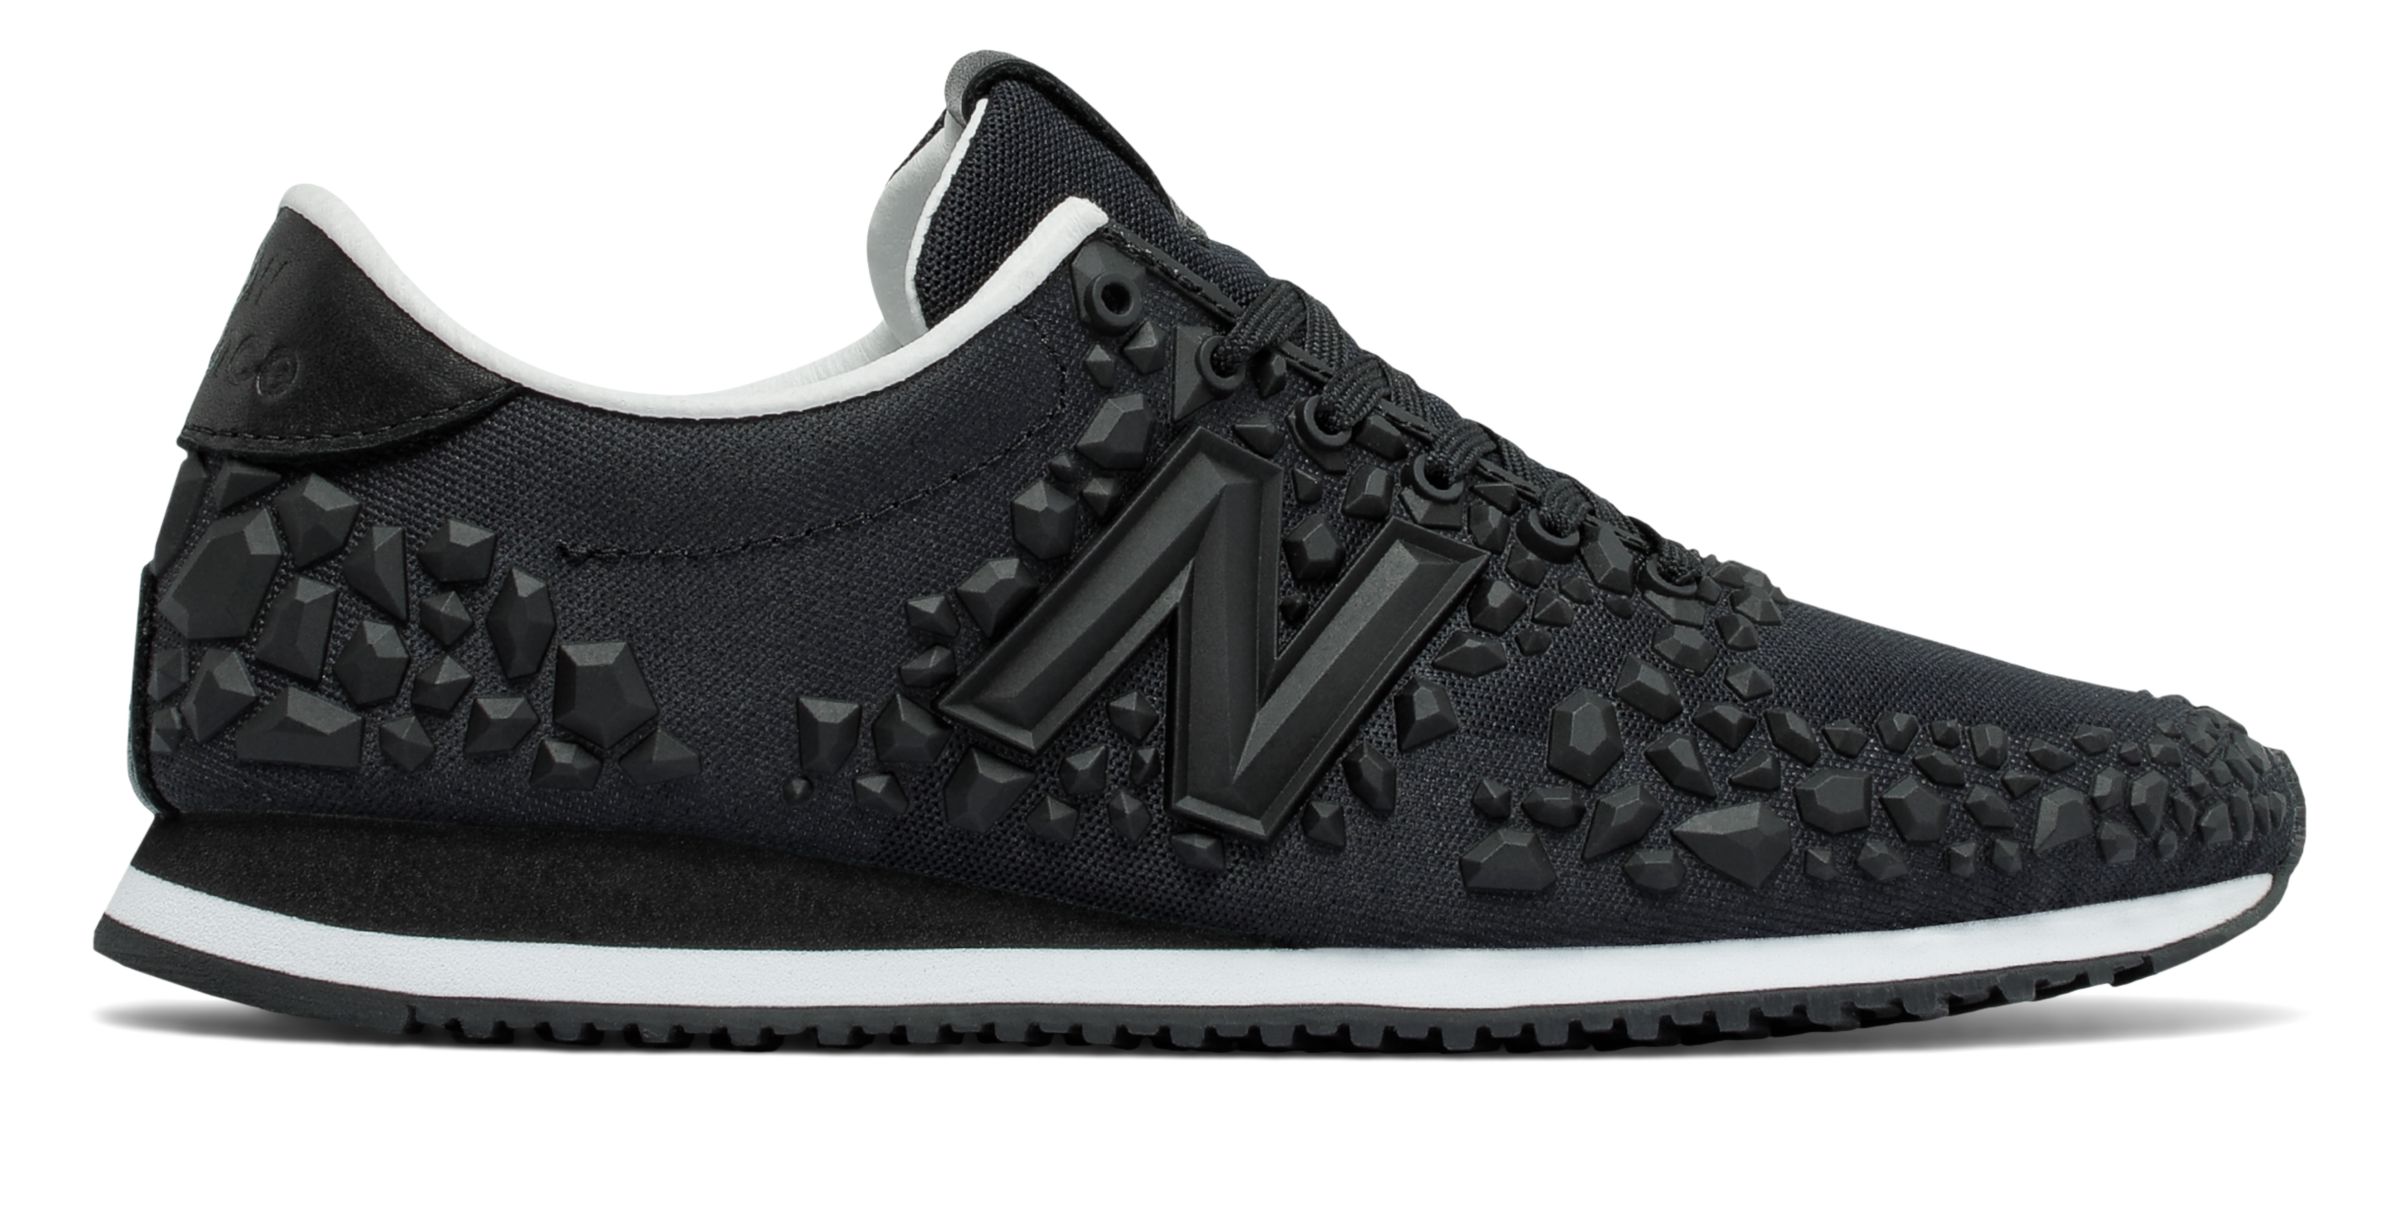 New Balance WL420-RENL on Sale - Discounts Up to 25% Off on WL420DFX at  Joe's New Balance Outlet